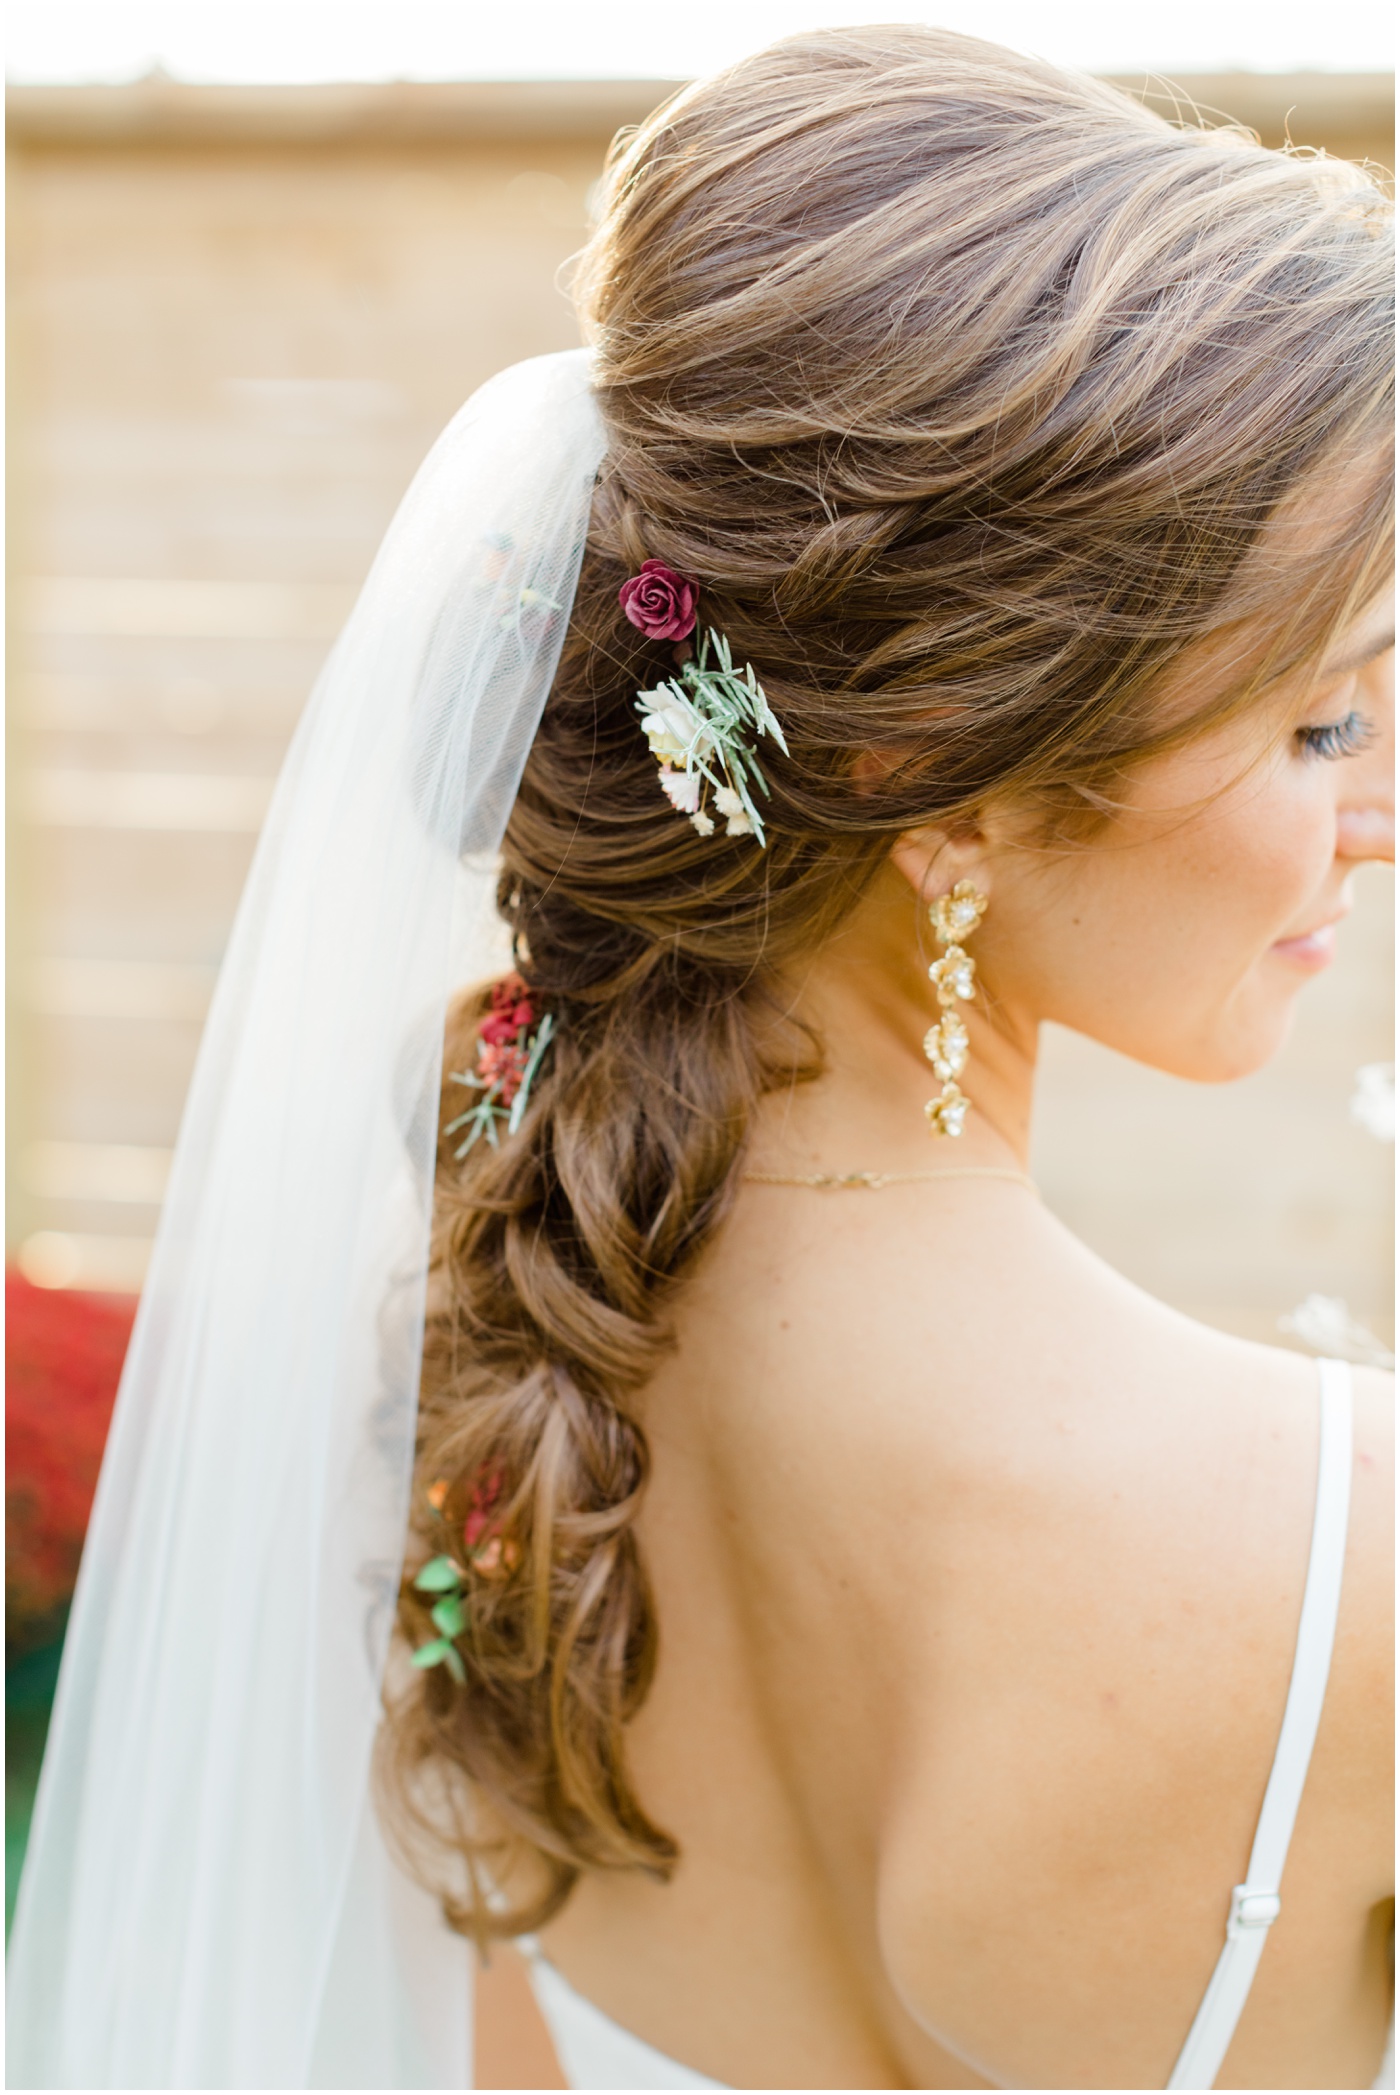 a close up of a bride's braided hair and veil during her bridal portaits